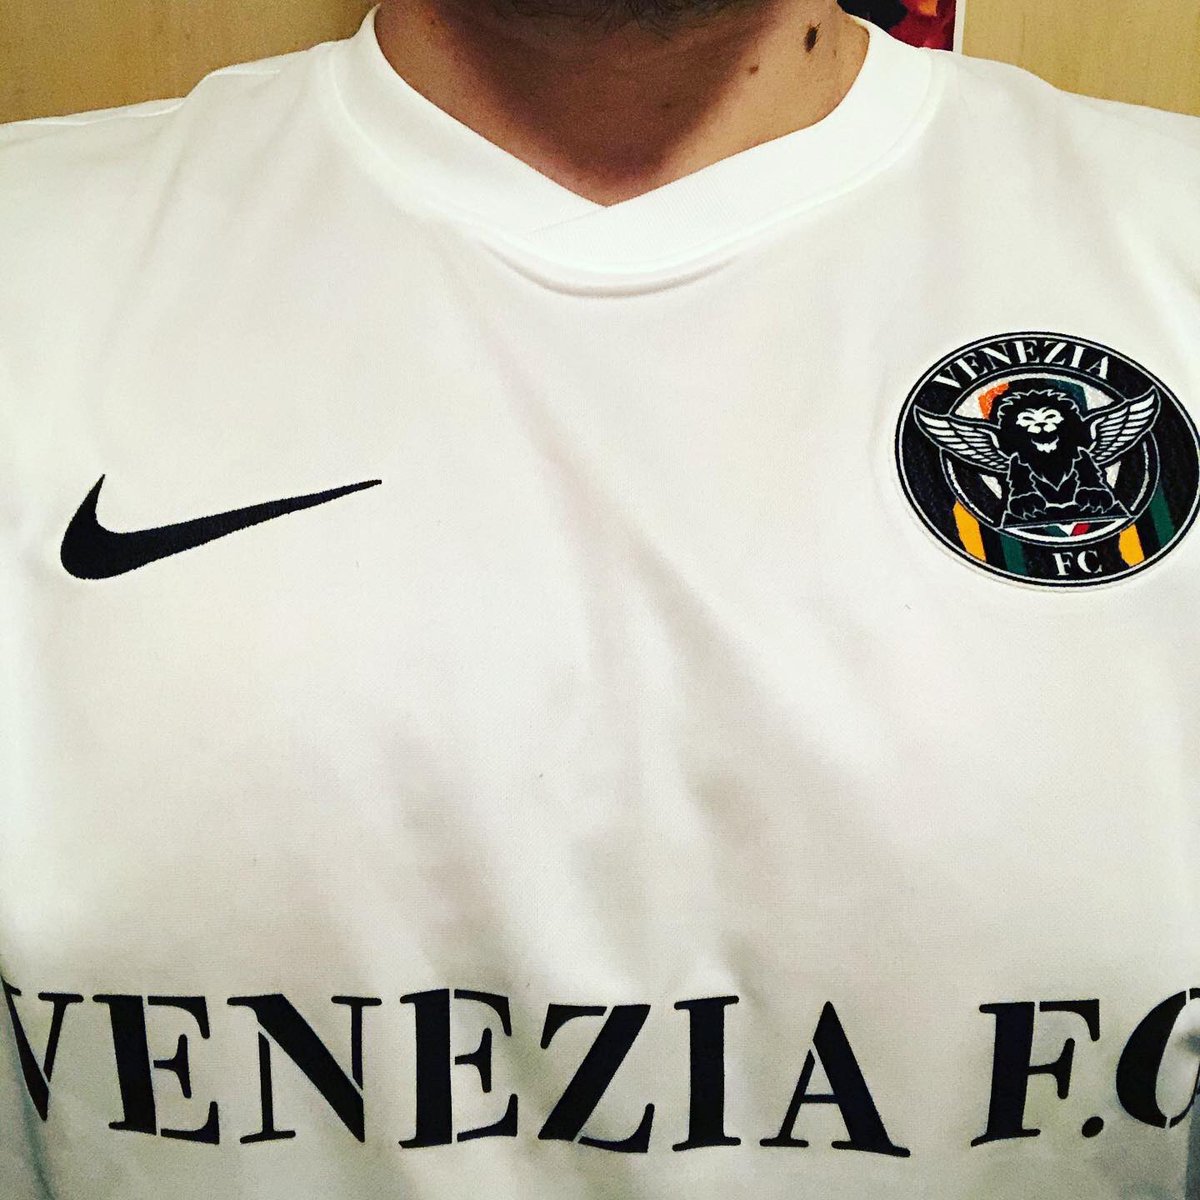 . @VeneziaFC_EN Away kit, 2016/17Back from a nasty injury, time to get back in shape and to start showing off my  #footballshirtcollection again! #VeneziaFC has a kit manufacturing deal with Nike, which is a bit unusual for lower-league teams in Italy #ClassicFootballShirts